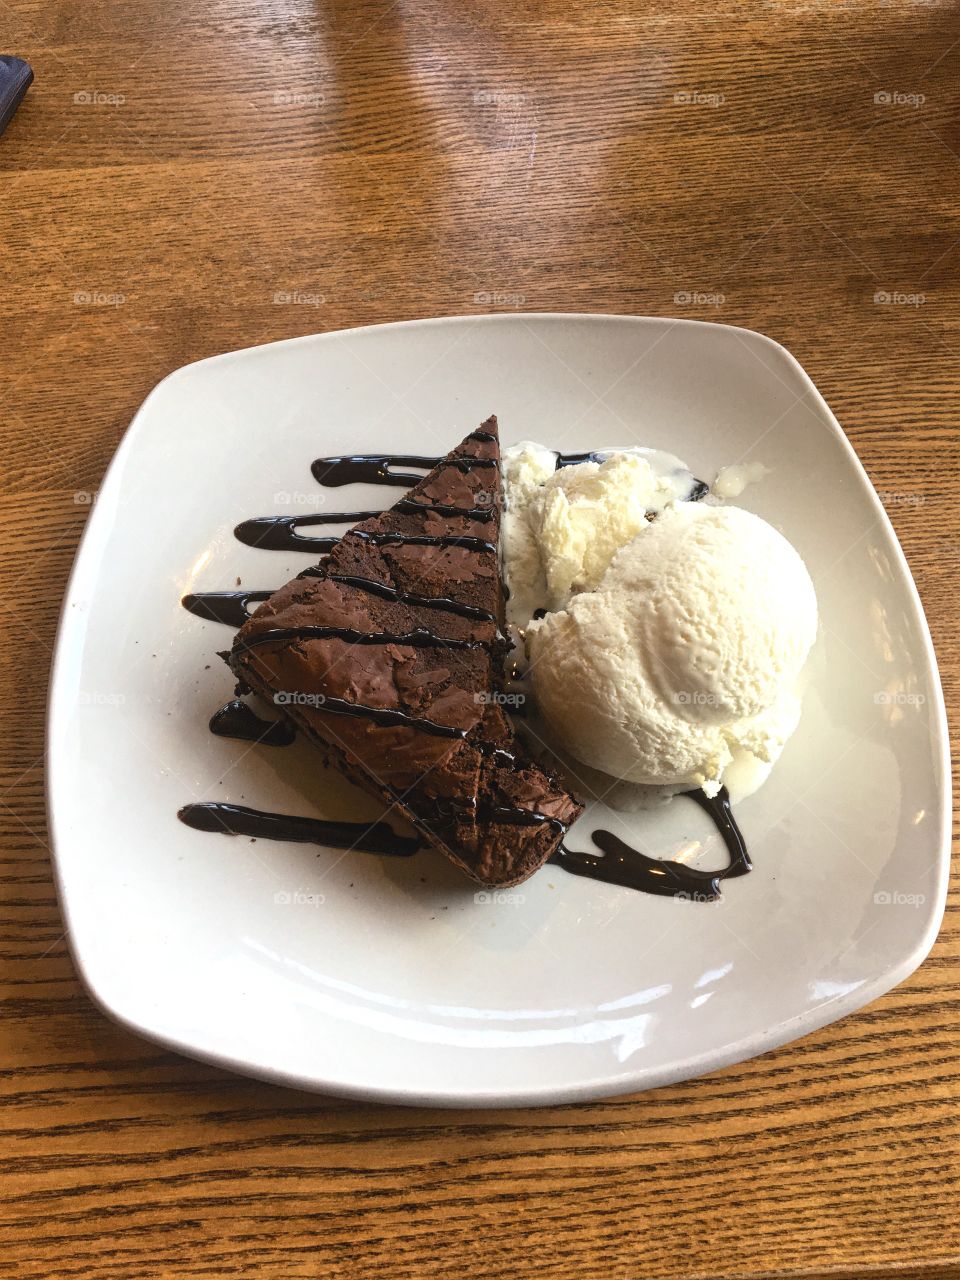 Chocolate brownie and ice cream at local pub